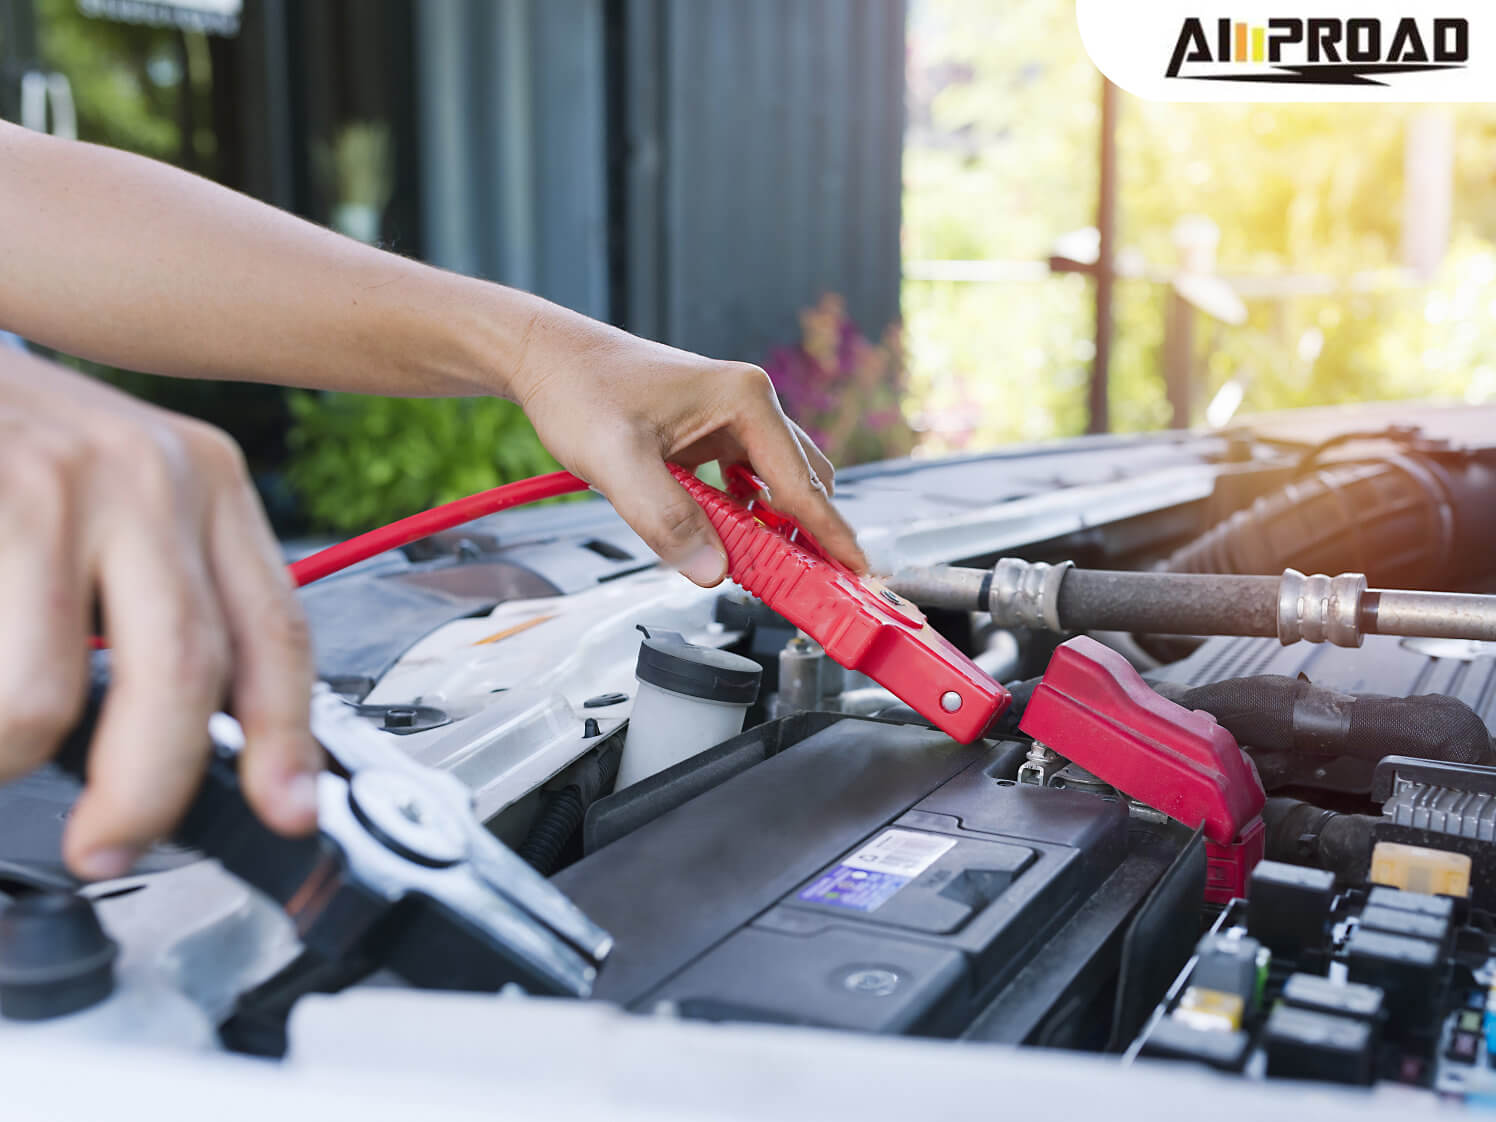 Can I Use a Jump Starter with Lower Voltage Output if My Vehicle's Battery Is Dead?